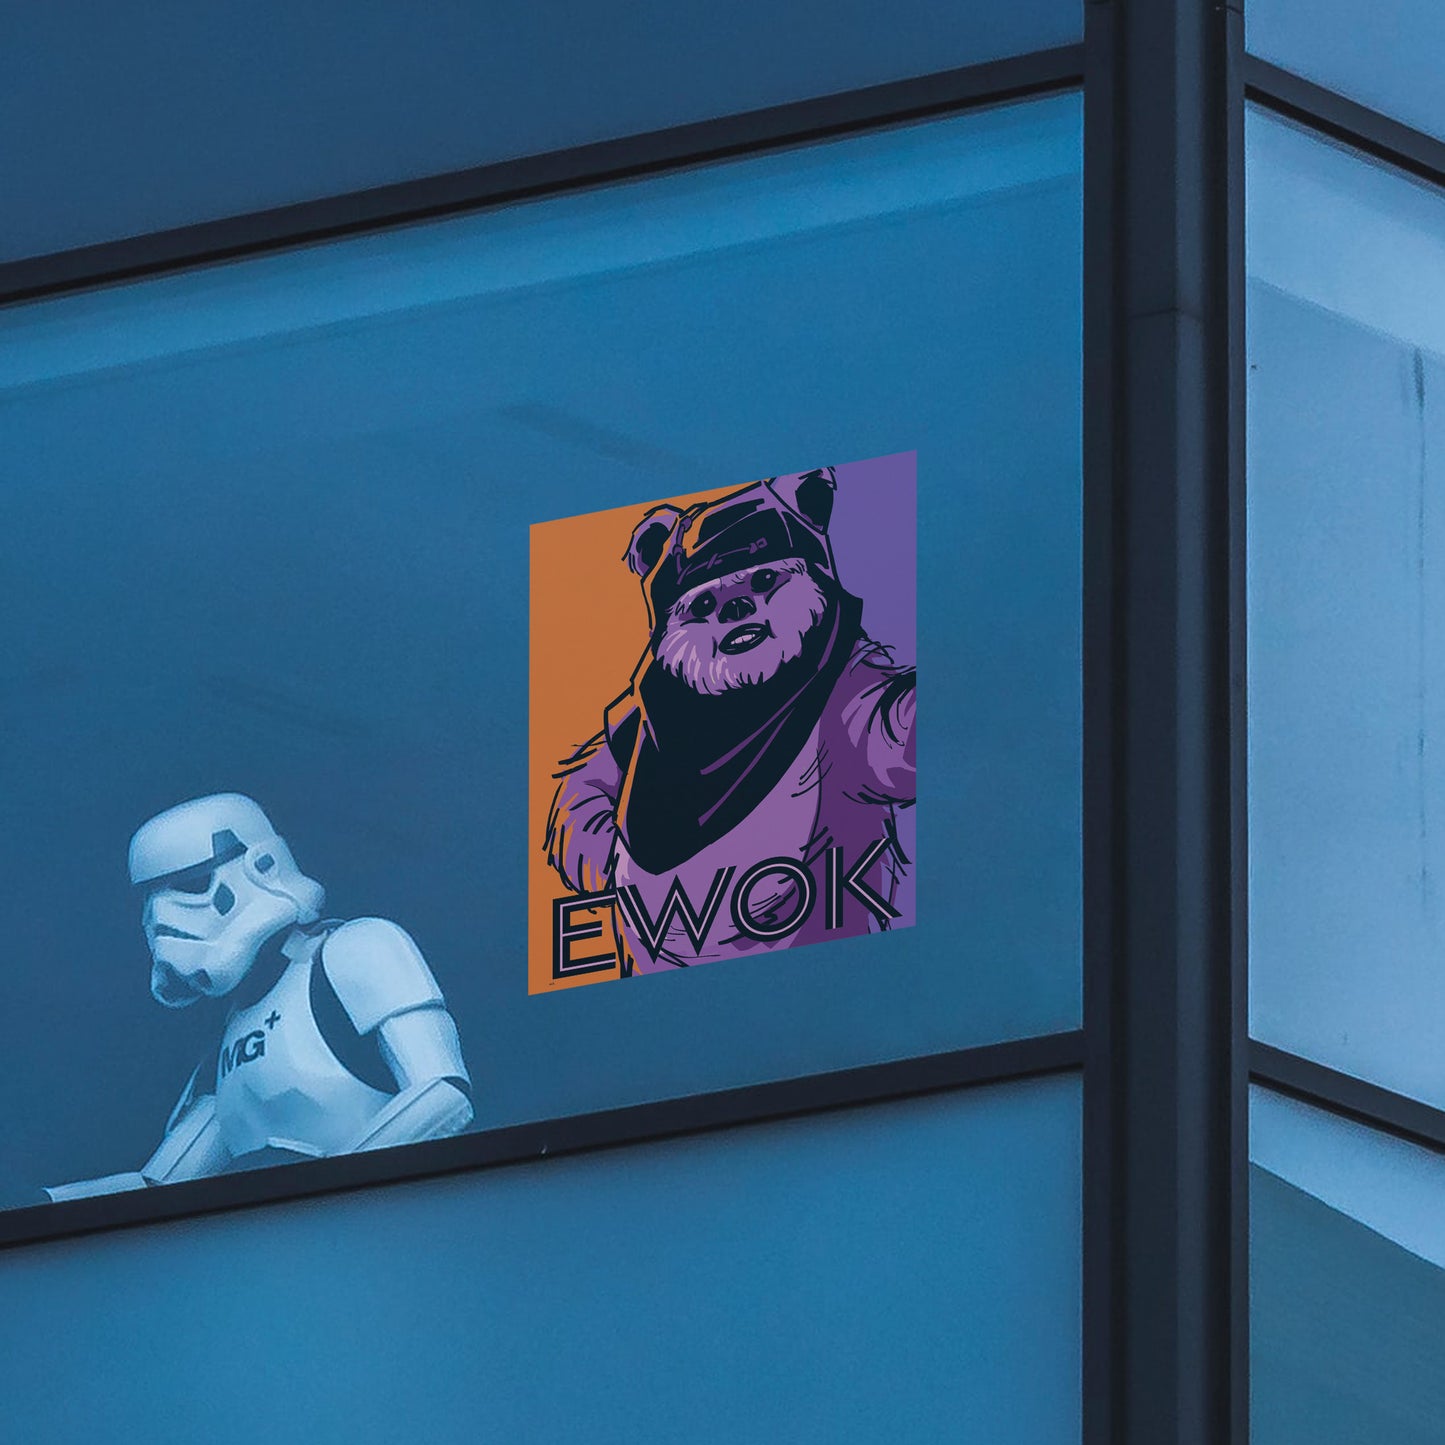 Ewok Pop Art Window Cling - Officially Licensed Star Wars Removable Window Static Decal